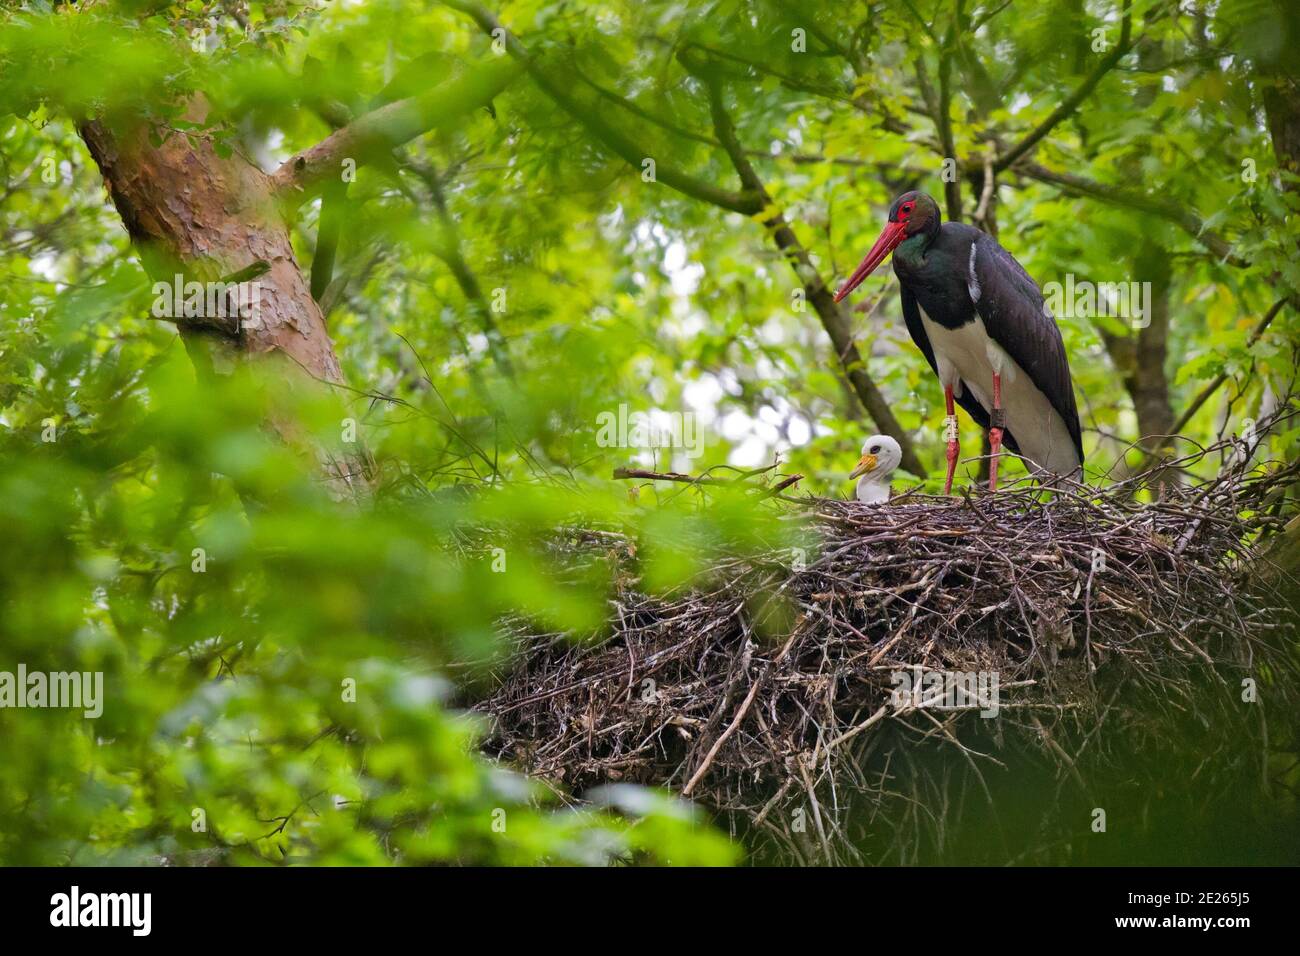 Black Stork (Ciconia nigra) adult with juvenile in nest, Hesse, Germany Stock Photo